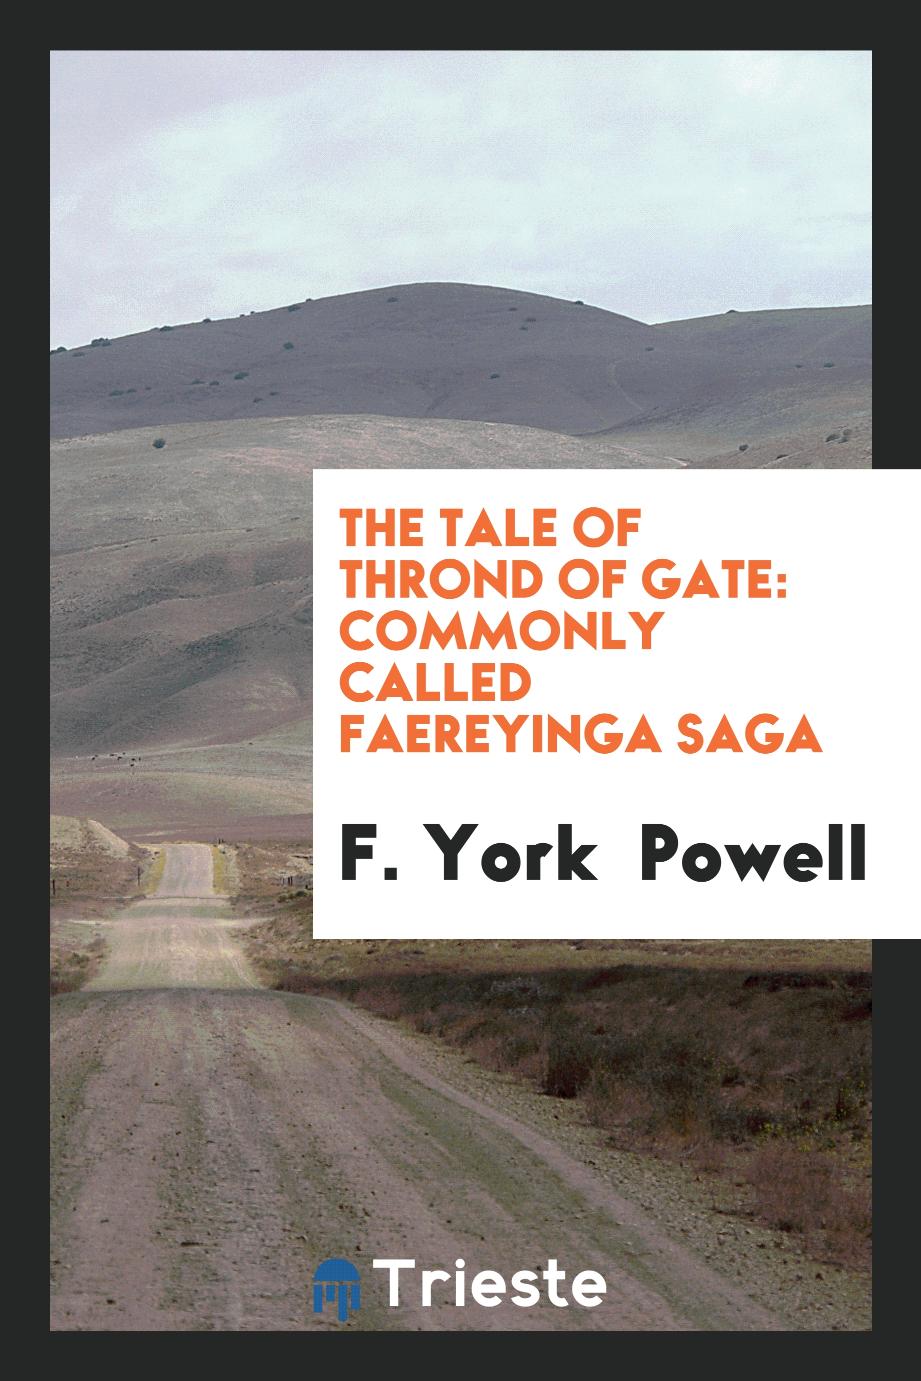 The Tale of Thrond of Gate: Commonly Called Faereyinga Saga